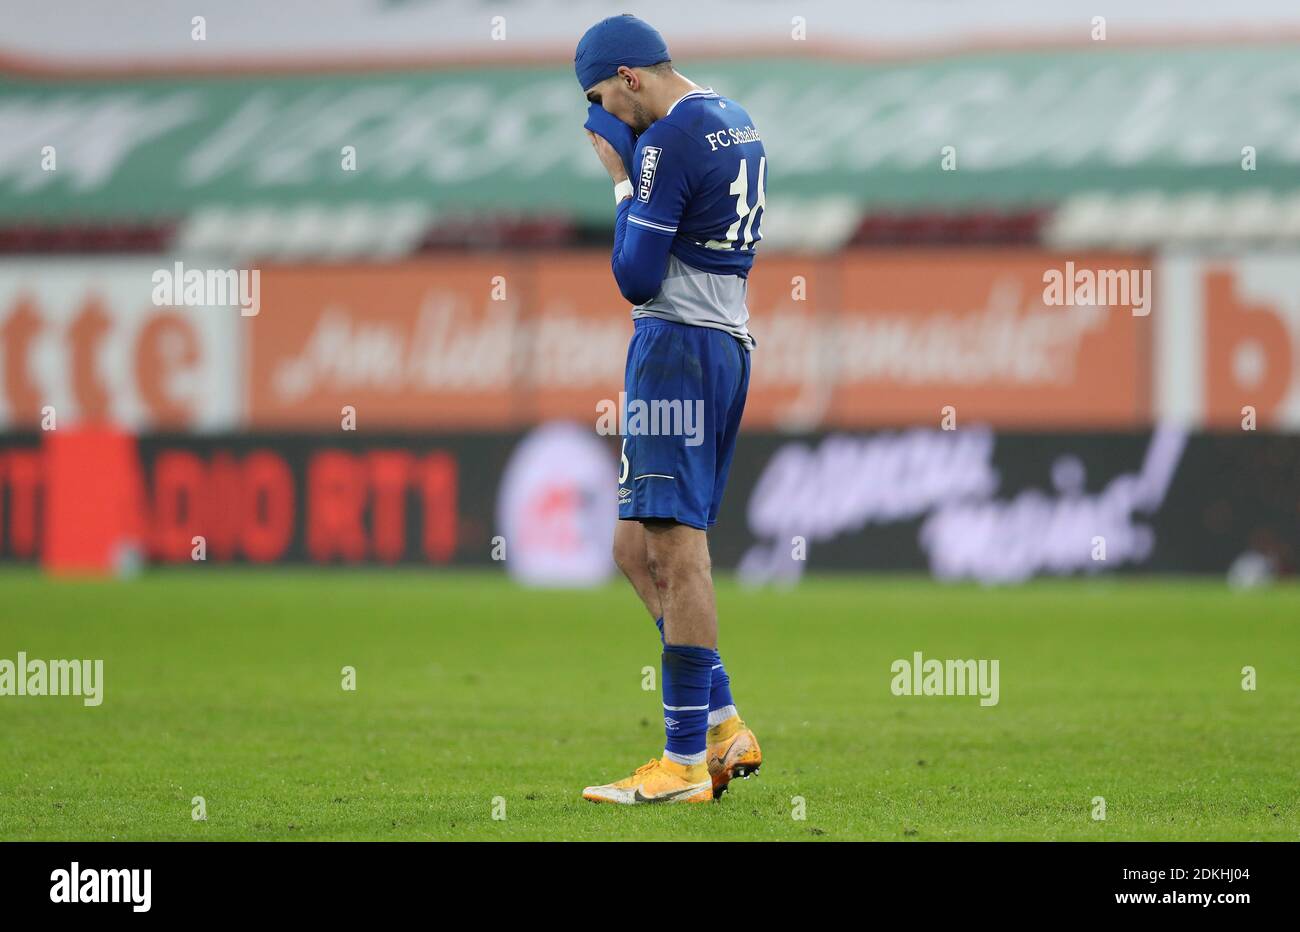 Nassim BOUJELLAB (FC Schalke 04), Enttaeuschung, frustrated, disappointed,  frustratedriert, dejected, action, single action, single image, cut out,  full body shot, whole figure Soccer 1. Bundesliga season 2020/2021, 11th  matchday, matchday11, FC Augsburg -